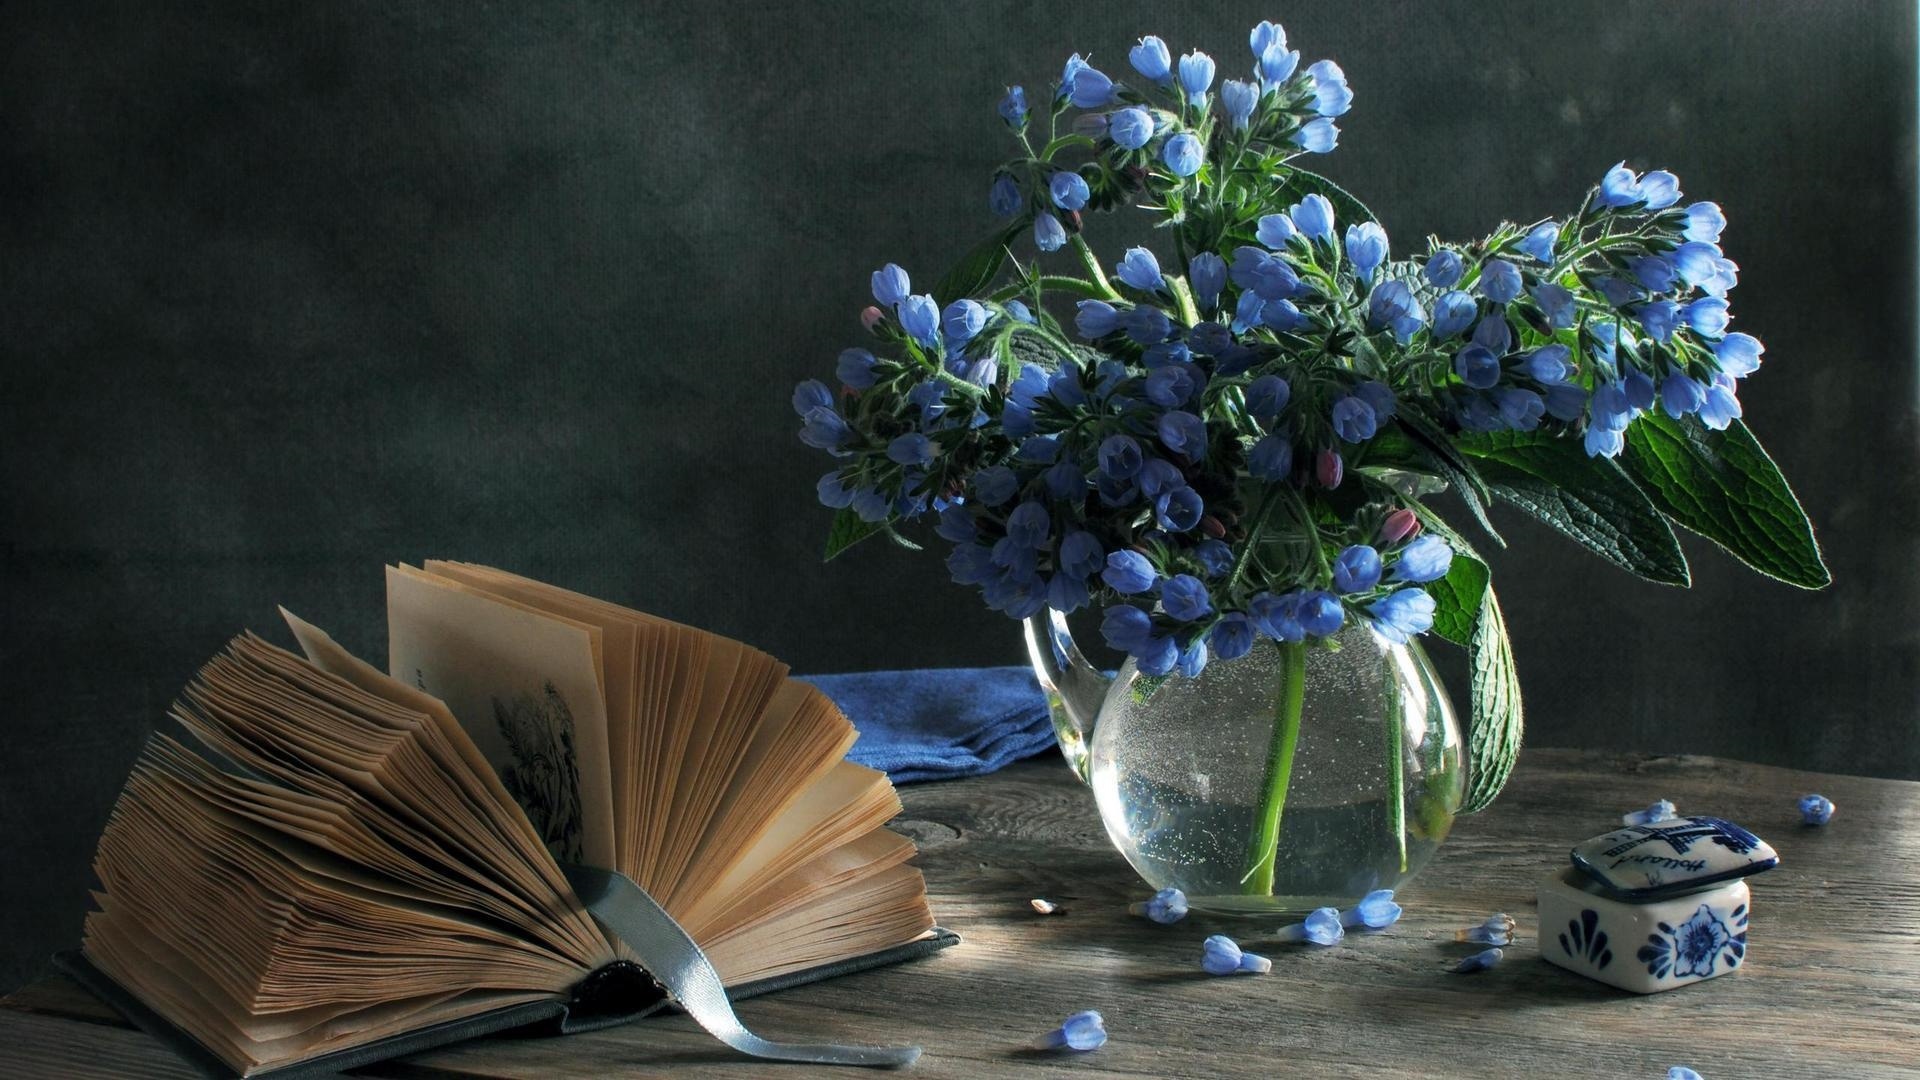 Book And Flower wallpaper photo hd